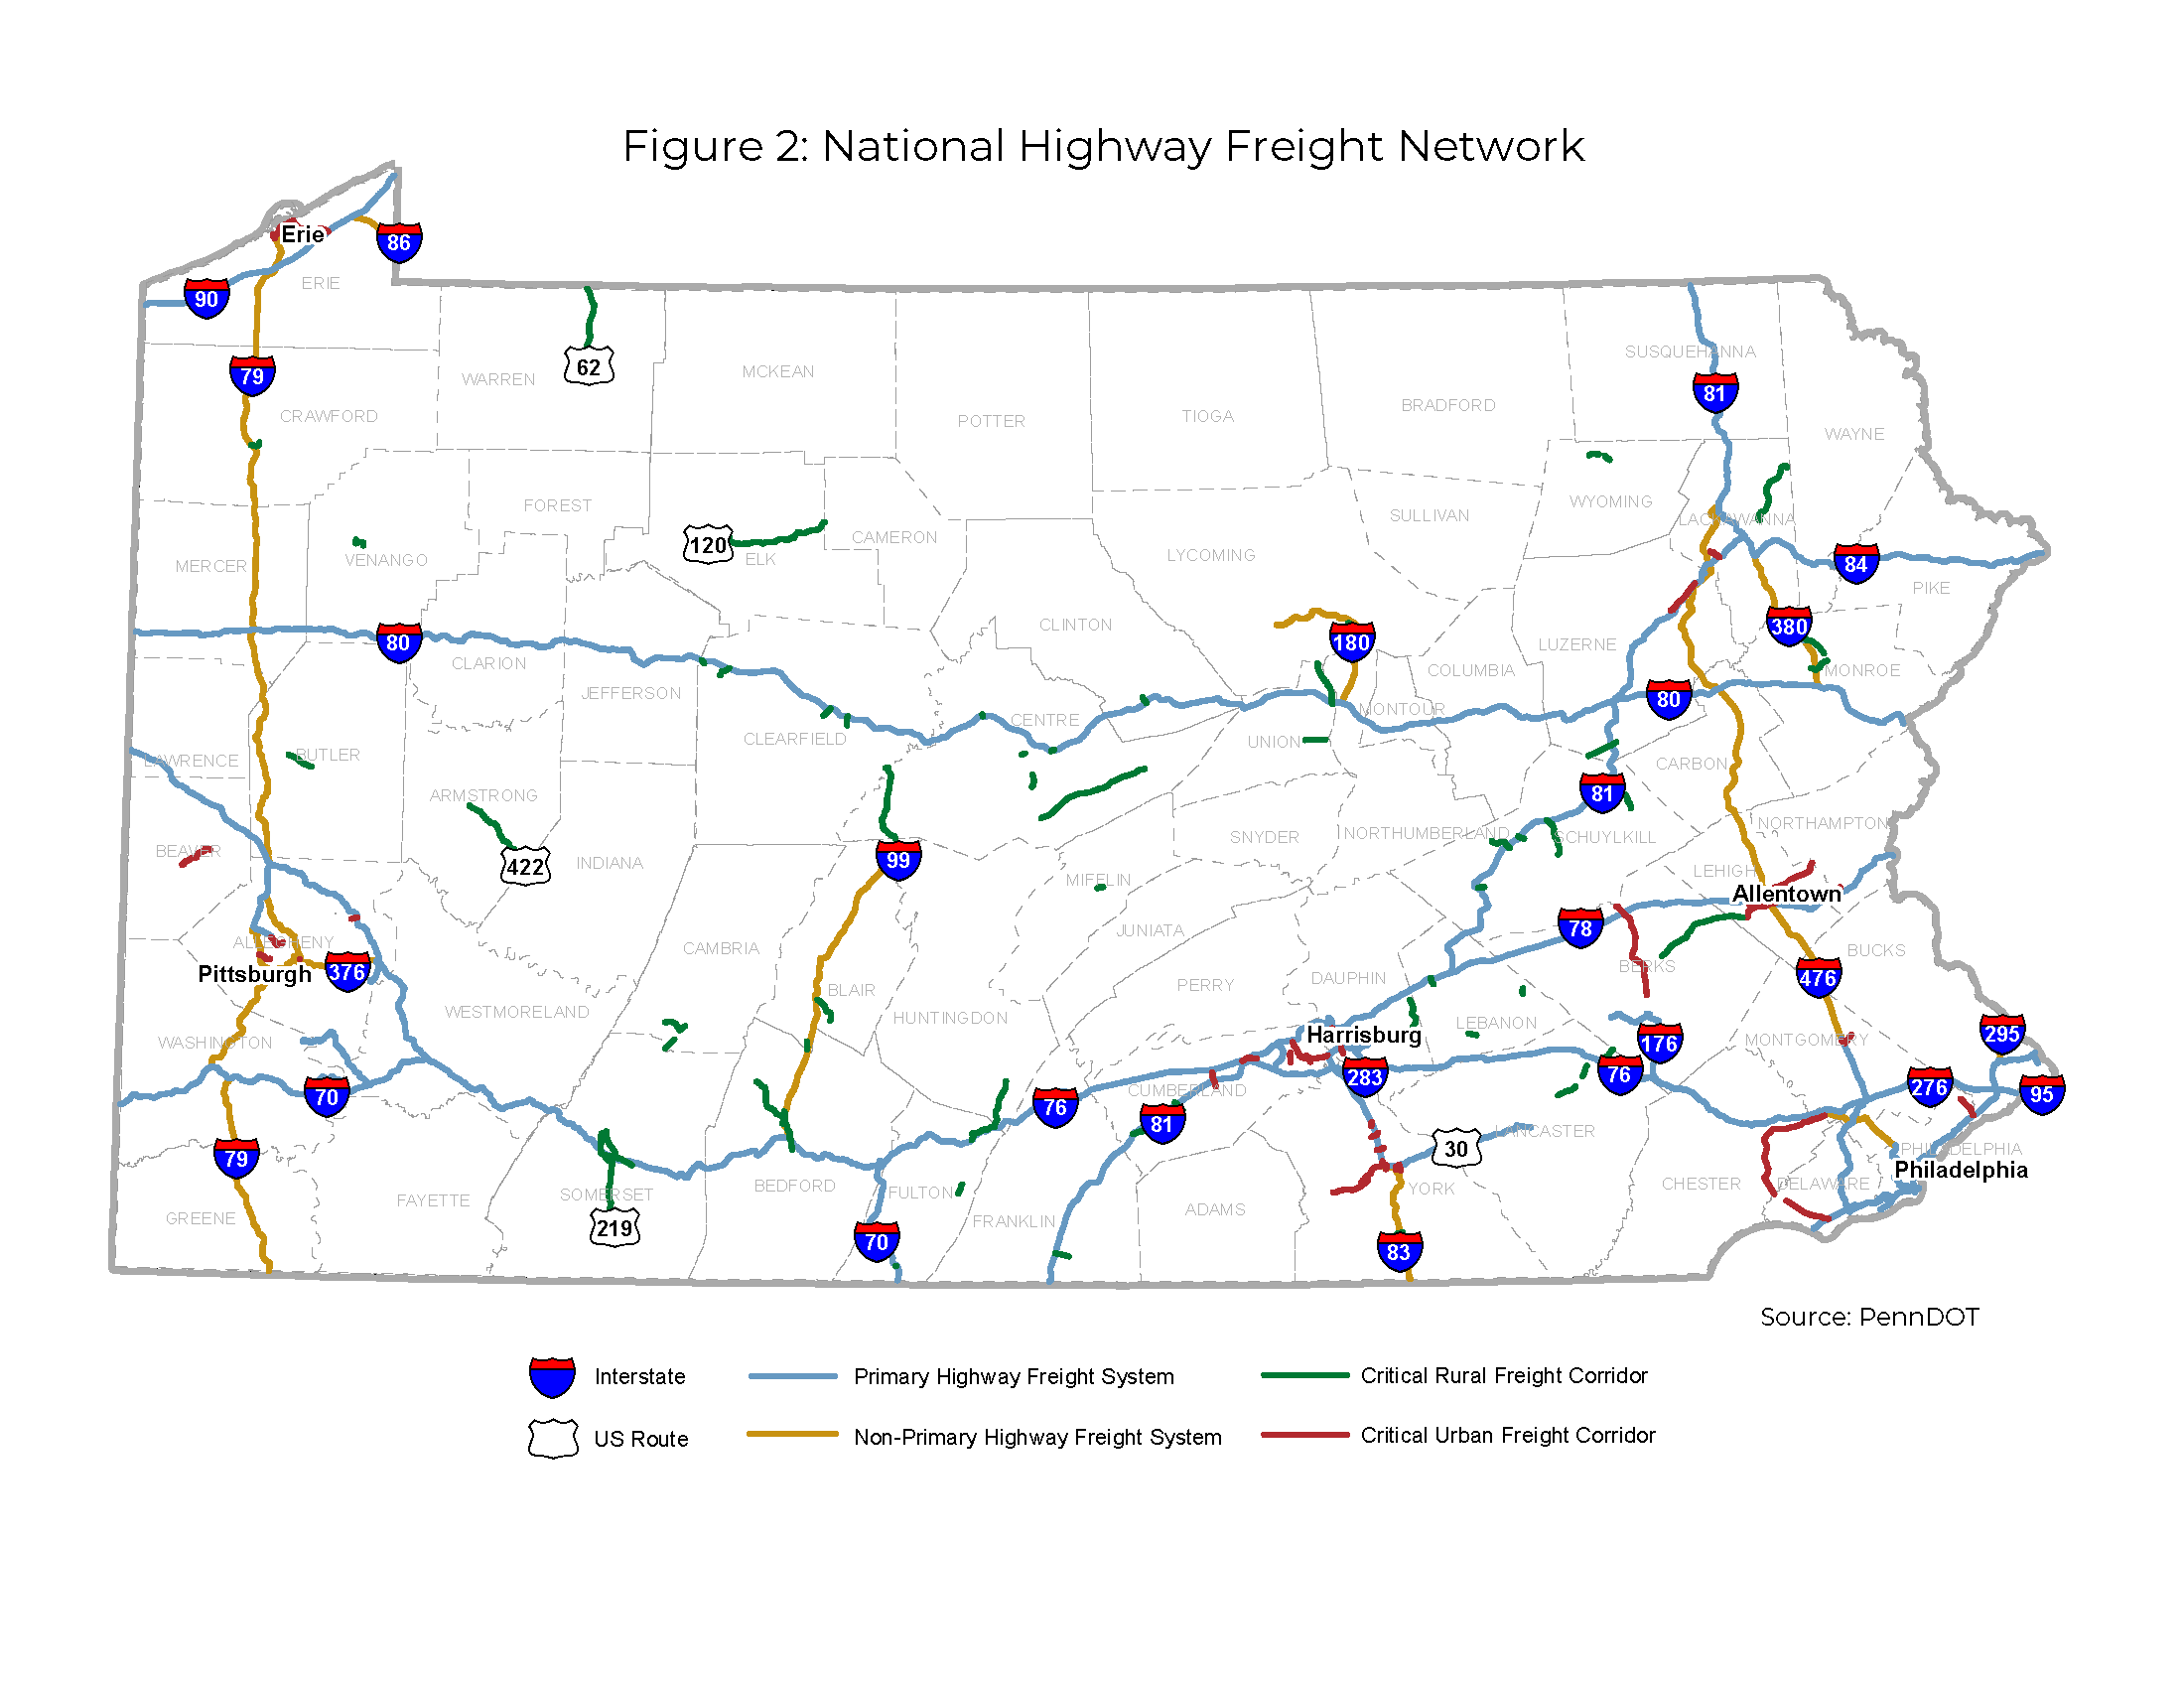 Figure 2 is a Pennsylvania state map illustrating Interstate system, US Routes, PA Routes, Primary Highway Freight System, Non-primary Highway Freight System, the Critical Rural Freight Corridor, and the Critical Urban Freight Corridor.